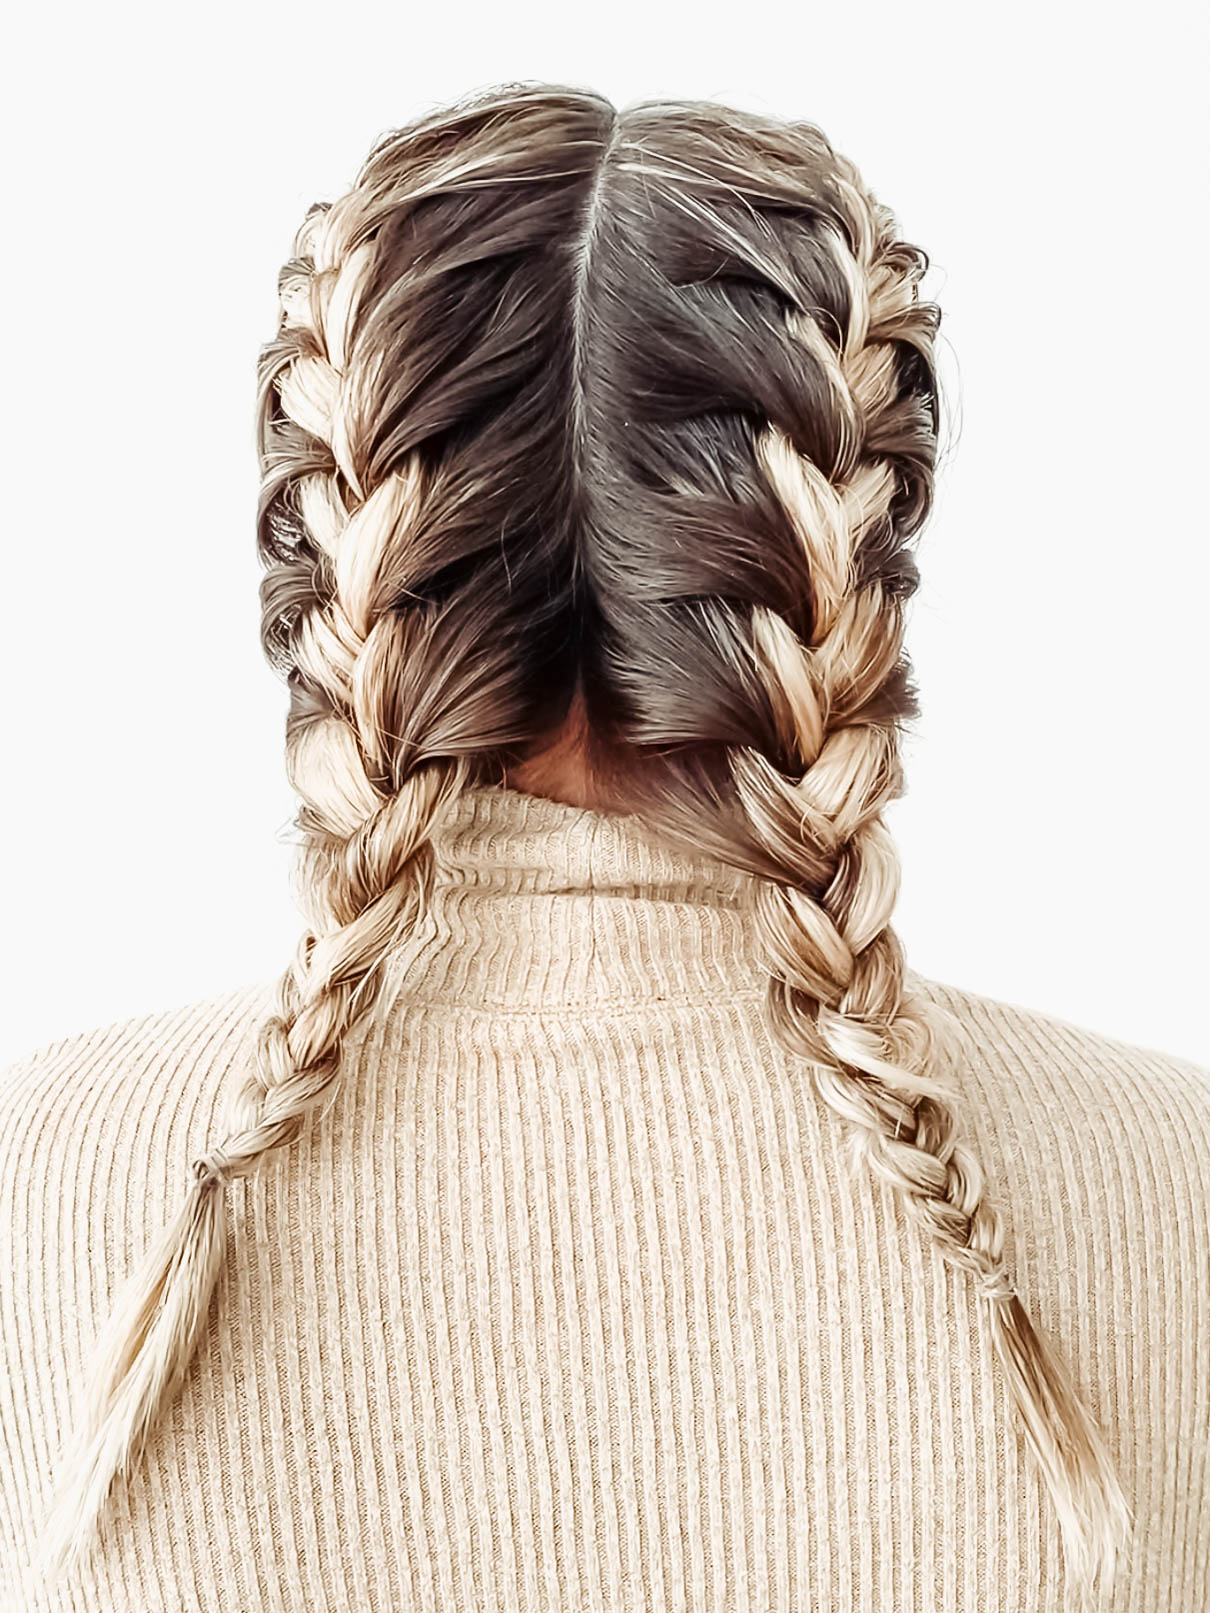 HOW TO DO A FRENCH BRAID! 😍 